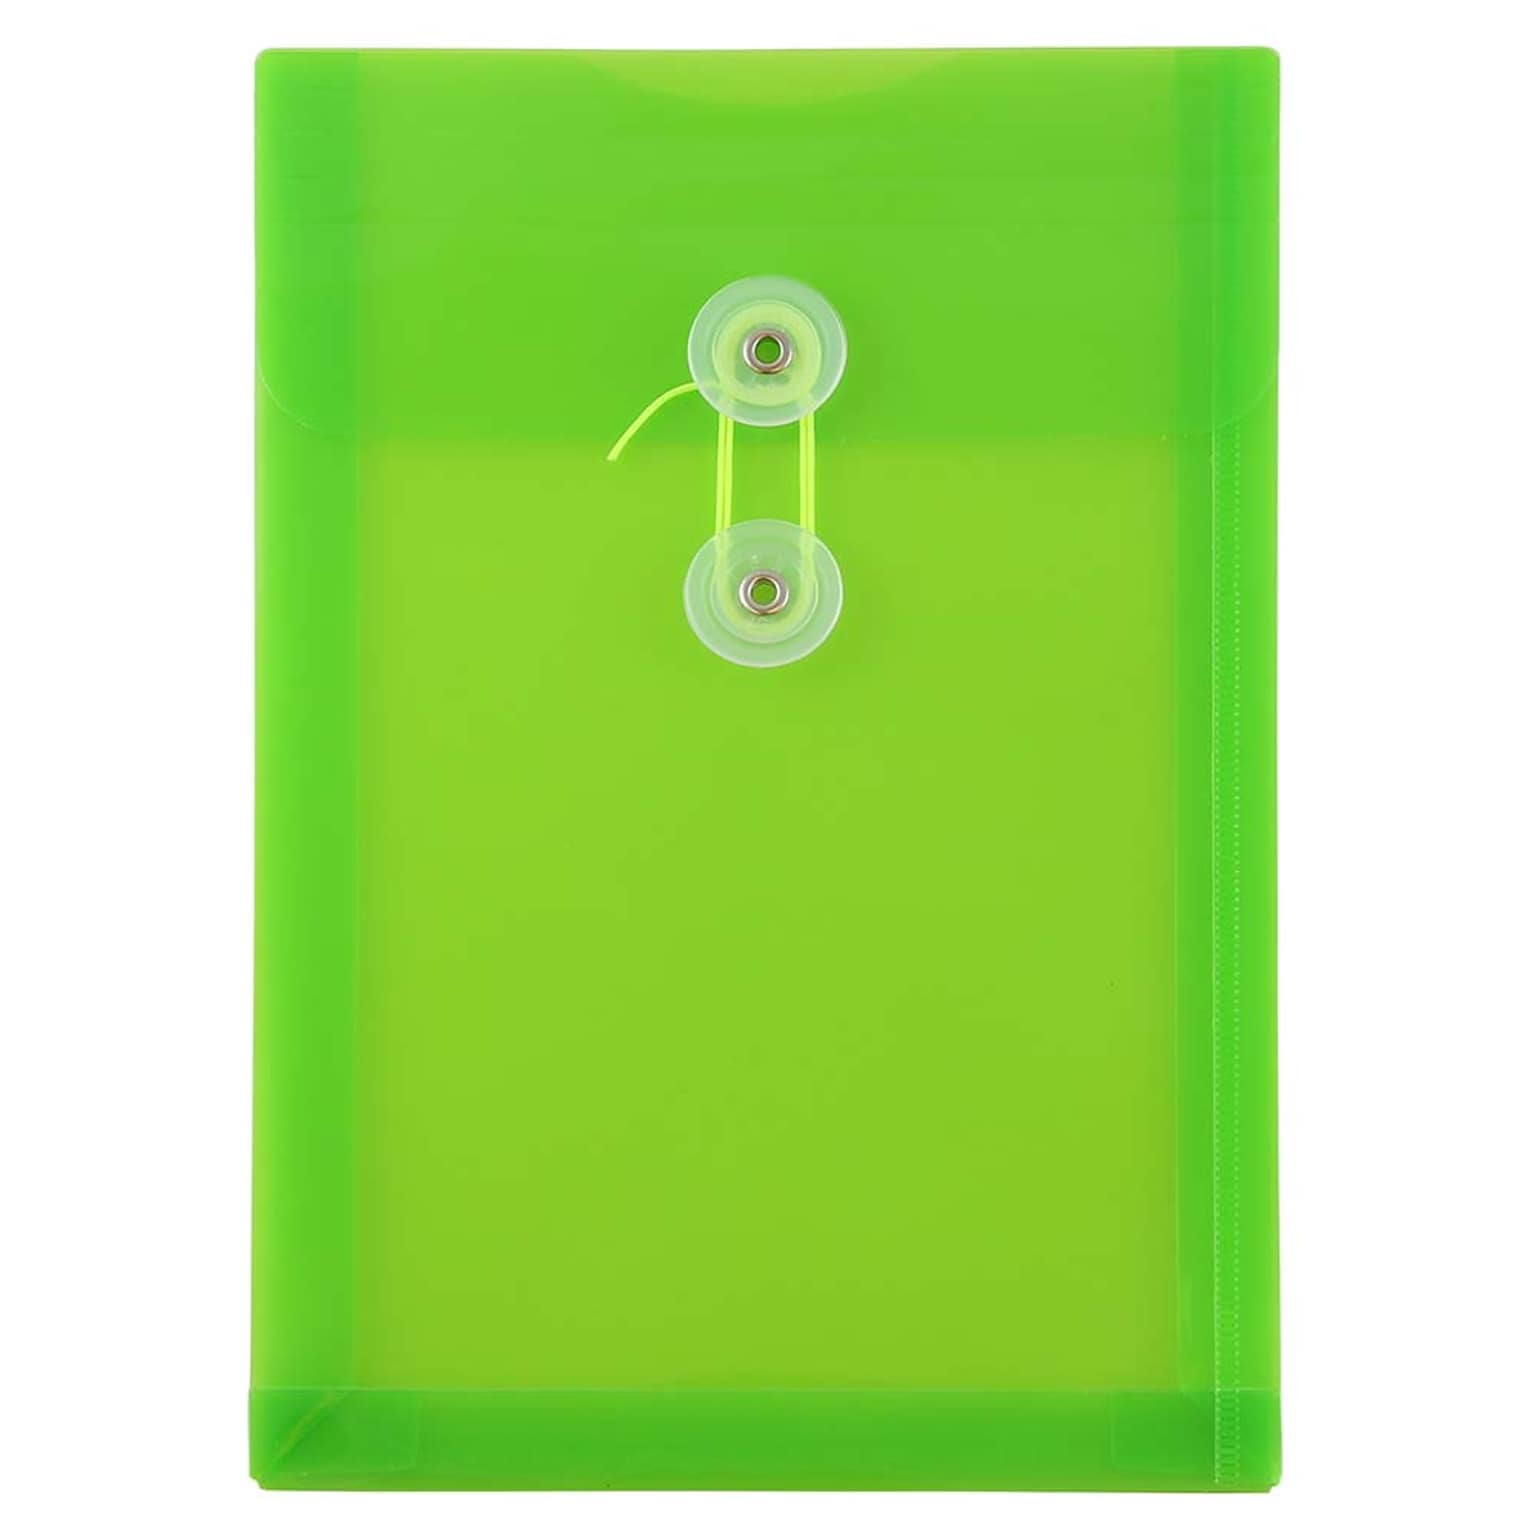 JAM Paper® Plastic Envelopes with Button and String Tie Closure, Open End, 6.25 x 9.25, Lime Green Poly, 12/pack (472B1LI)